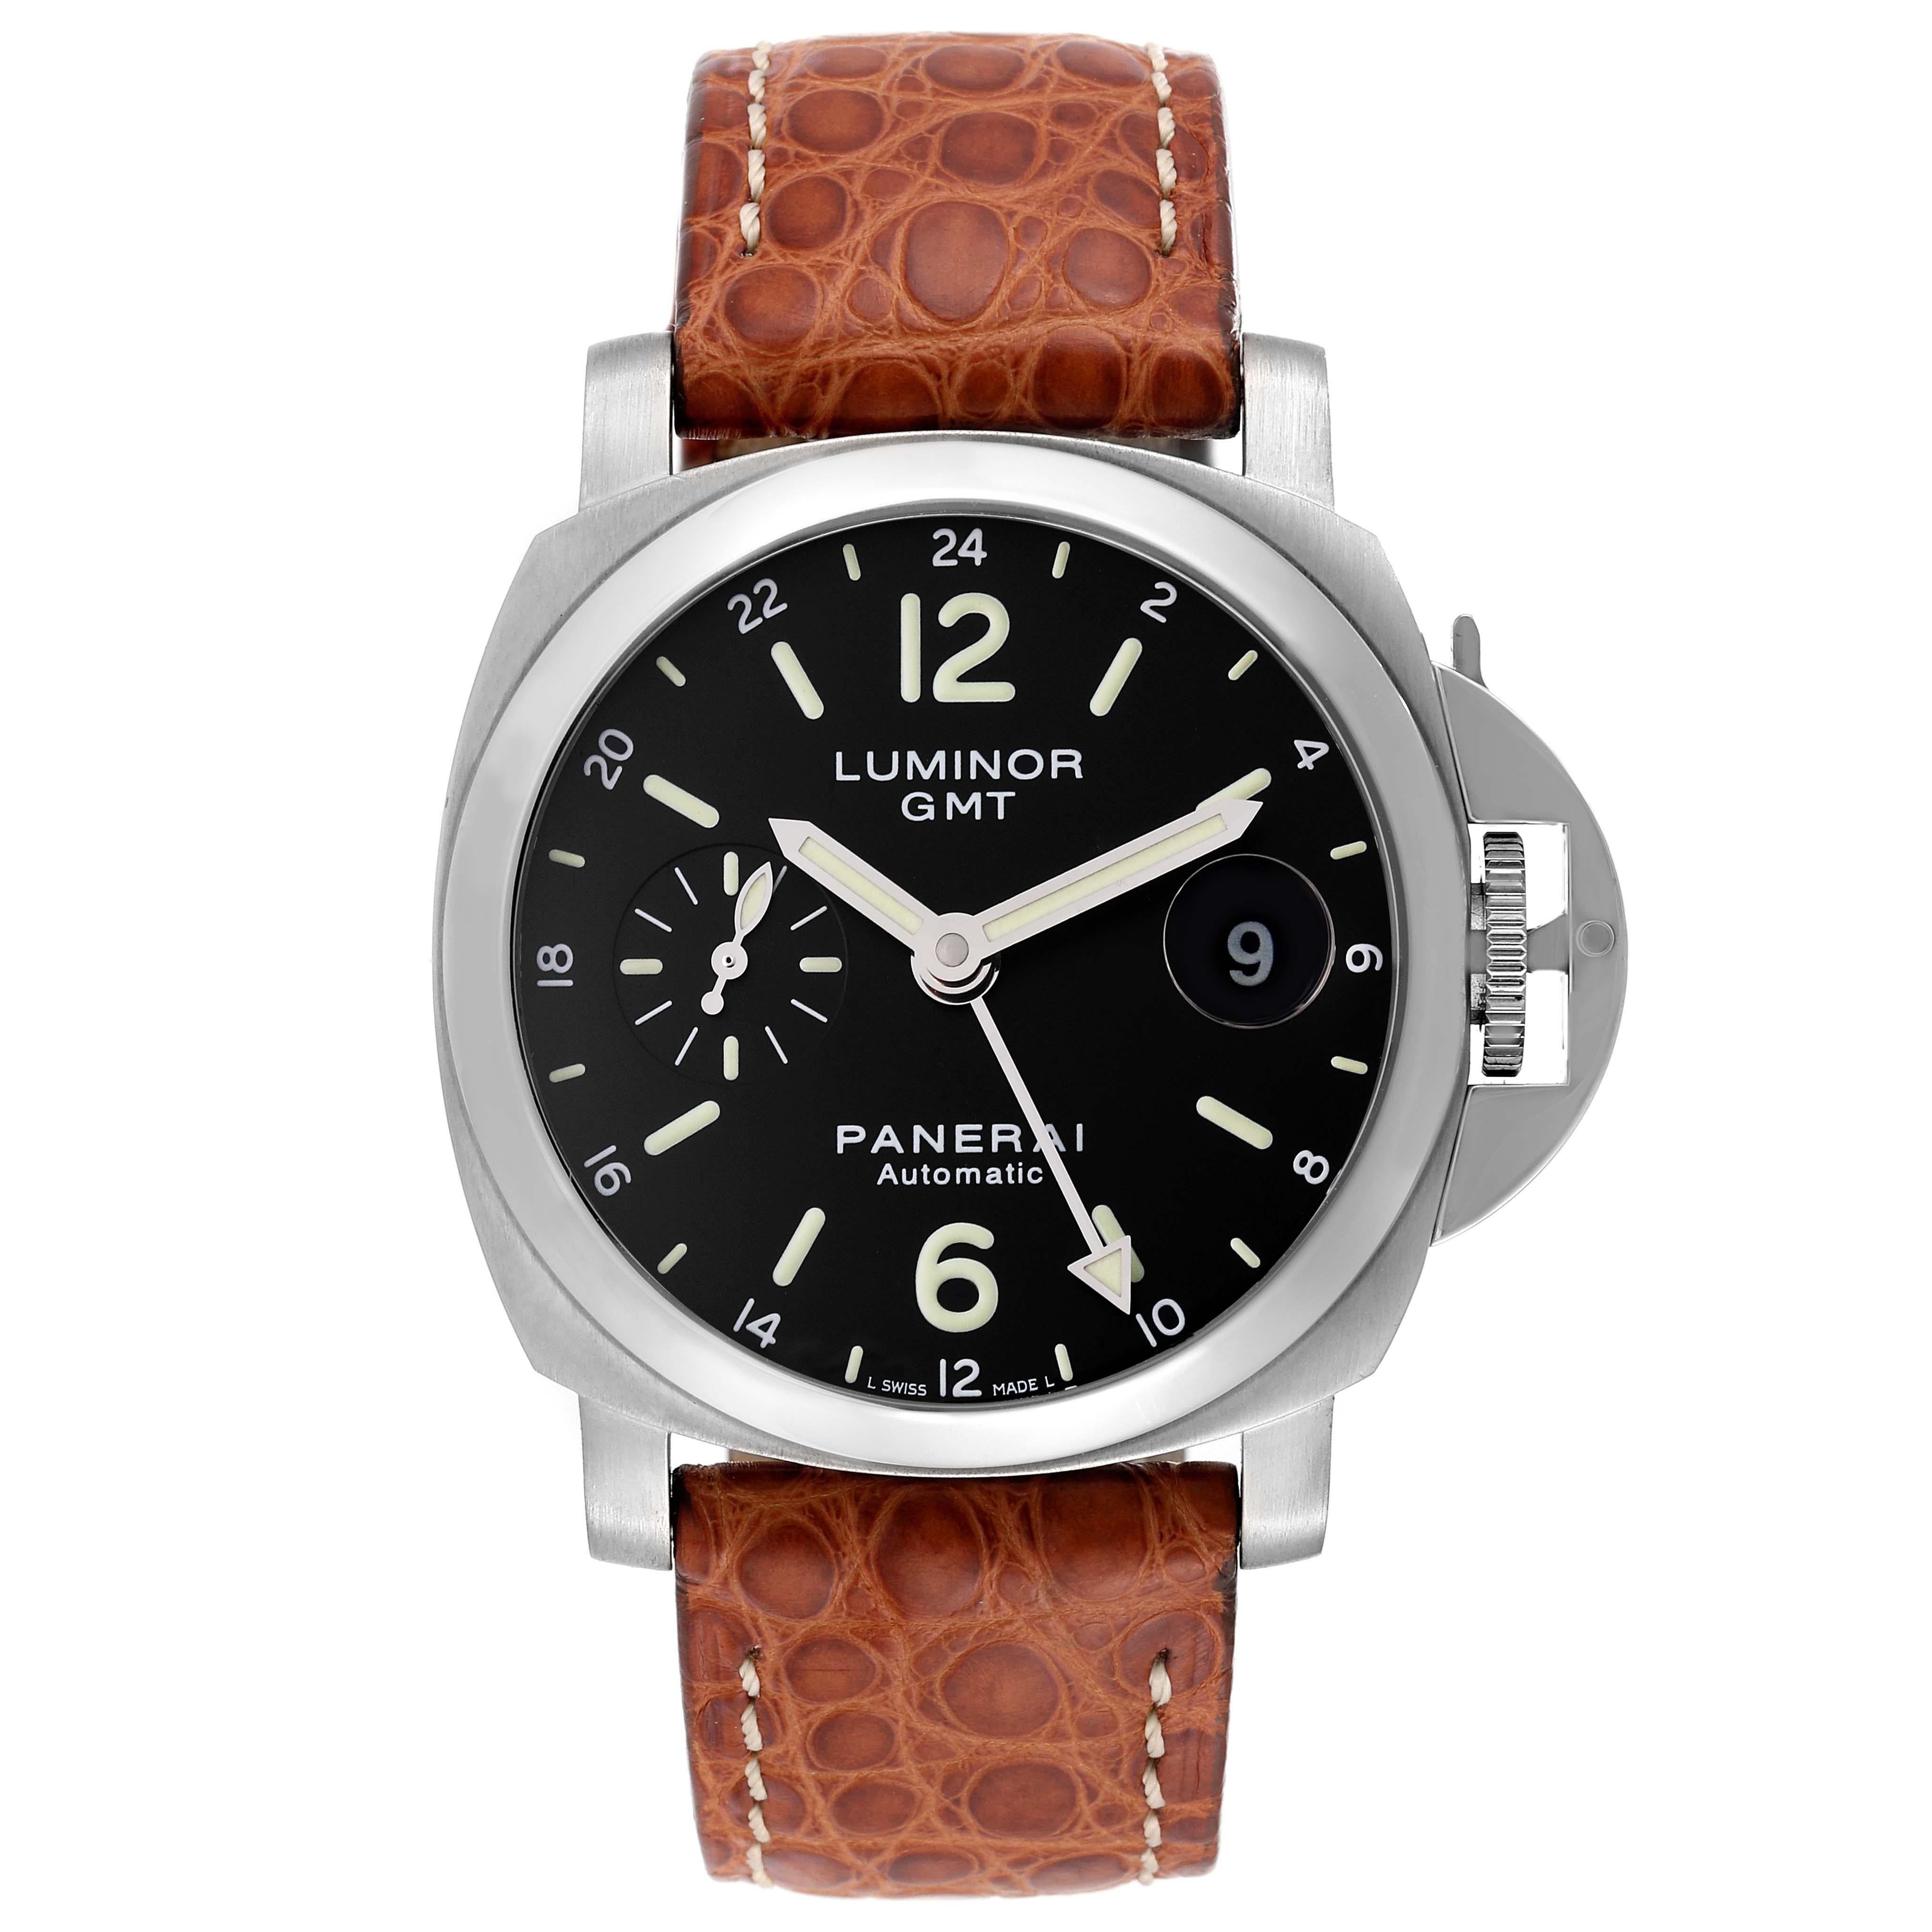 Panerai Luminor GMT 40mm Black Dial Steel Mens Watch PAM00244 Box Card. Automatic self-winding movement. Caliber OP VIII. Two part cushion shaped stainless steel case 40.0 mm in diameter. Panerai patented crown protector. Polished stainless steel